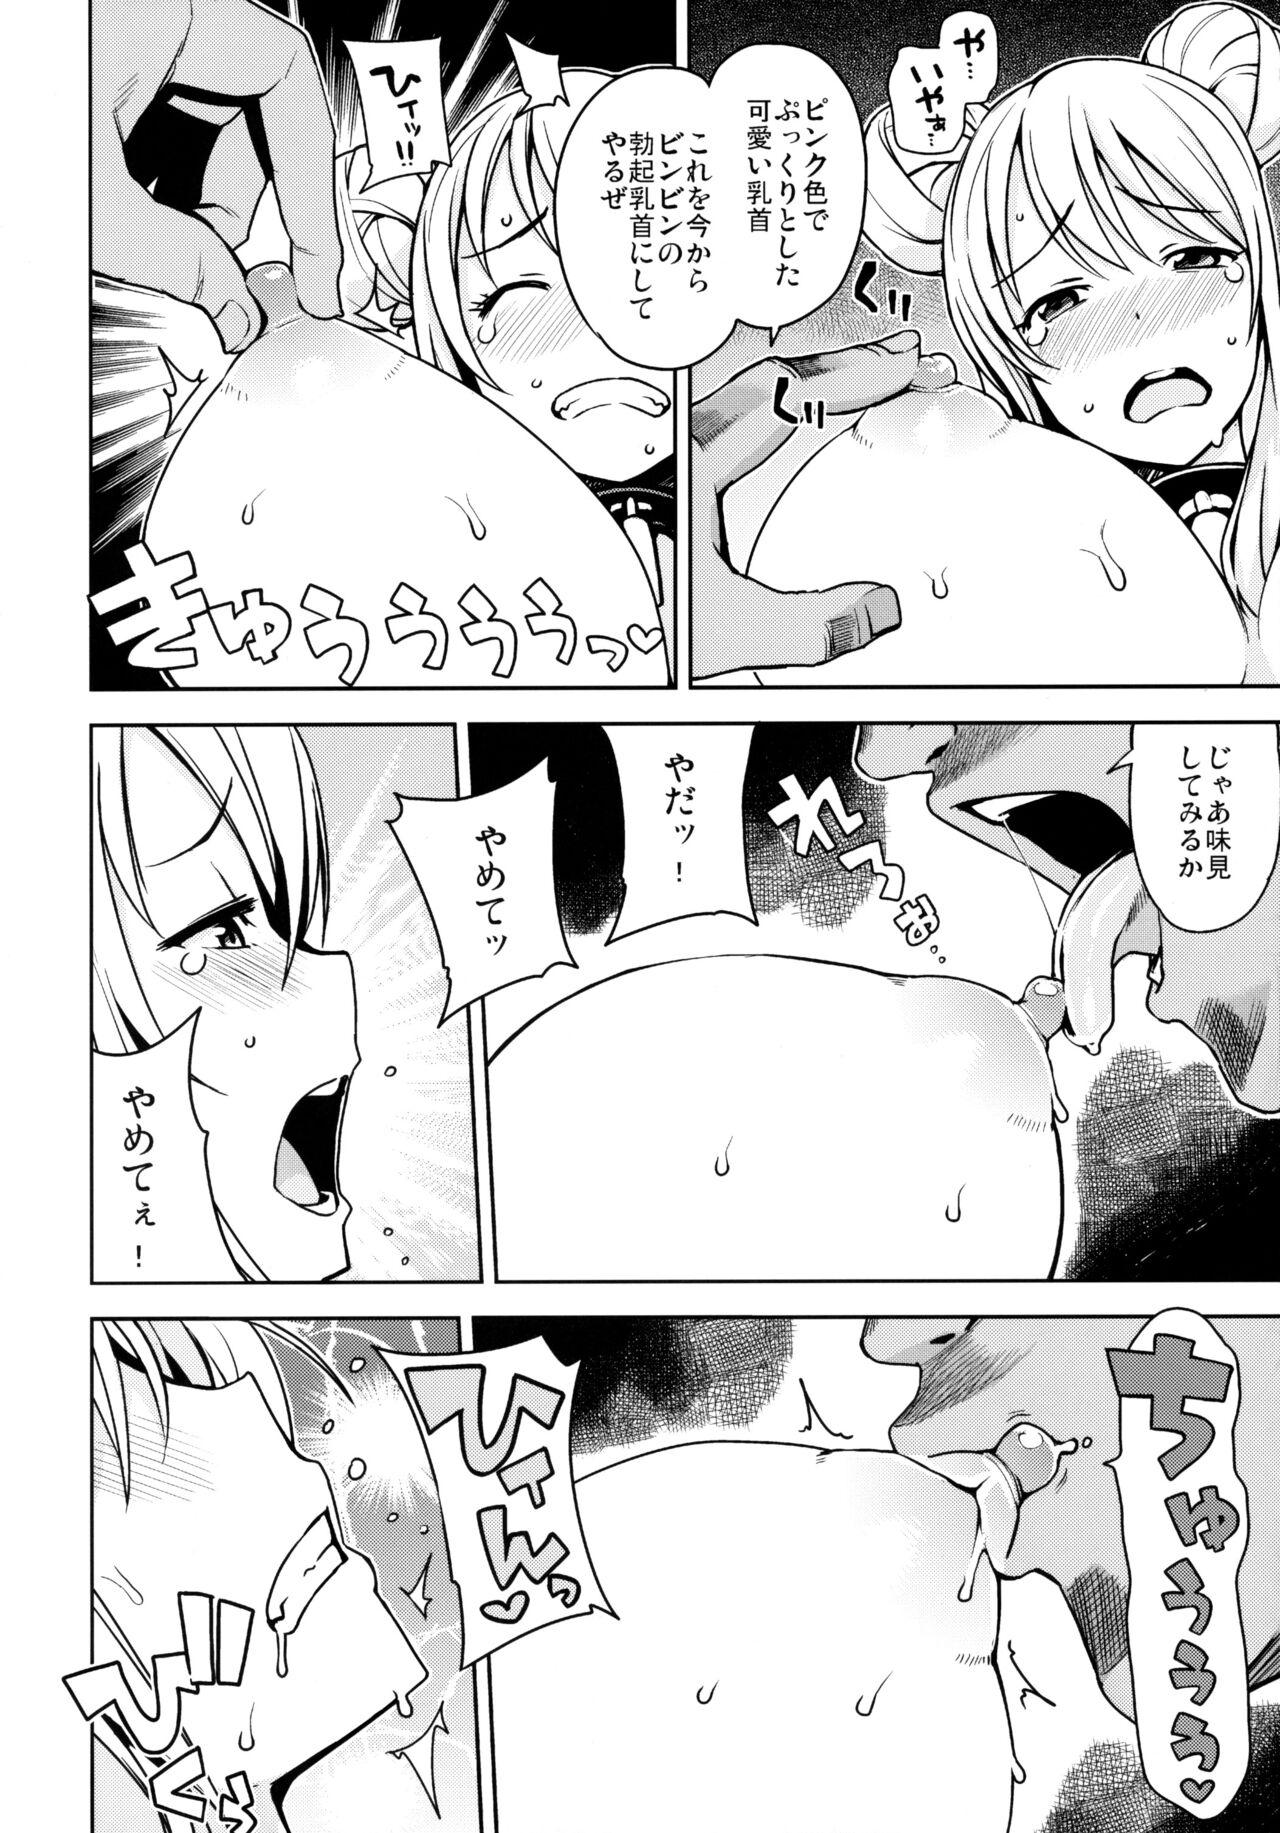 Throatfuck Witch Bitch Collection Vol.1 - Fairy tail Verified Profile - Page 7